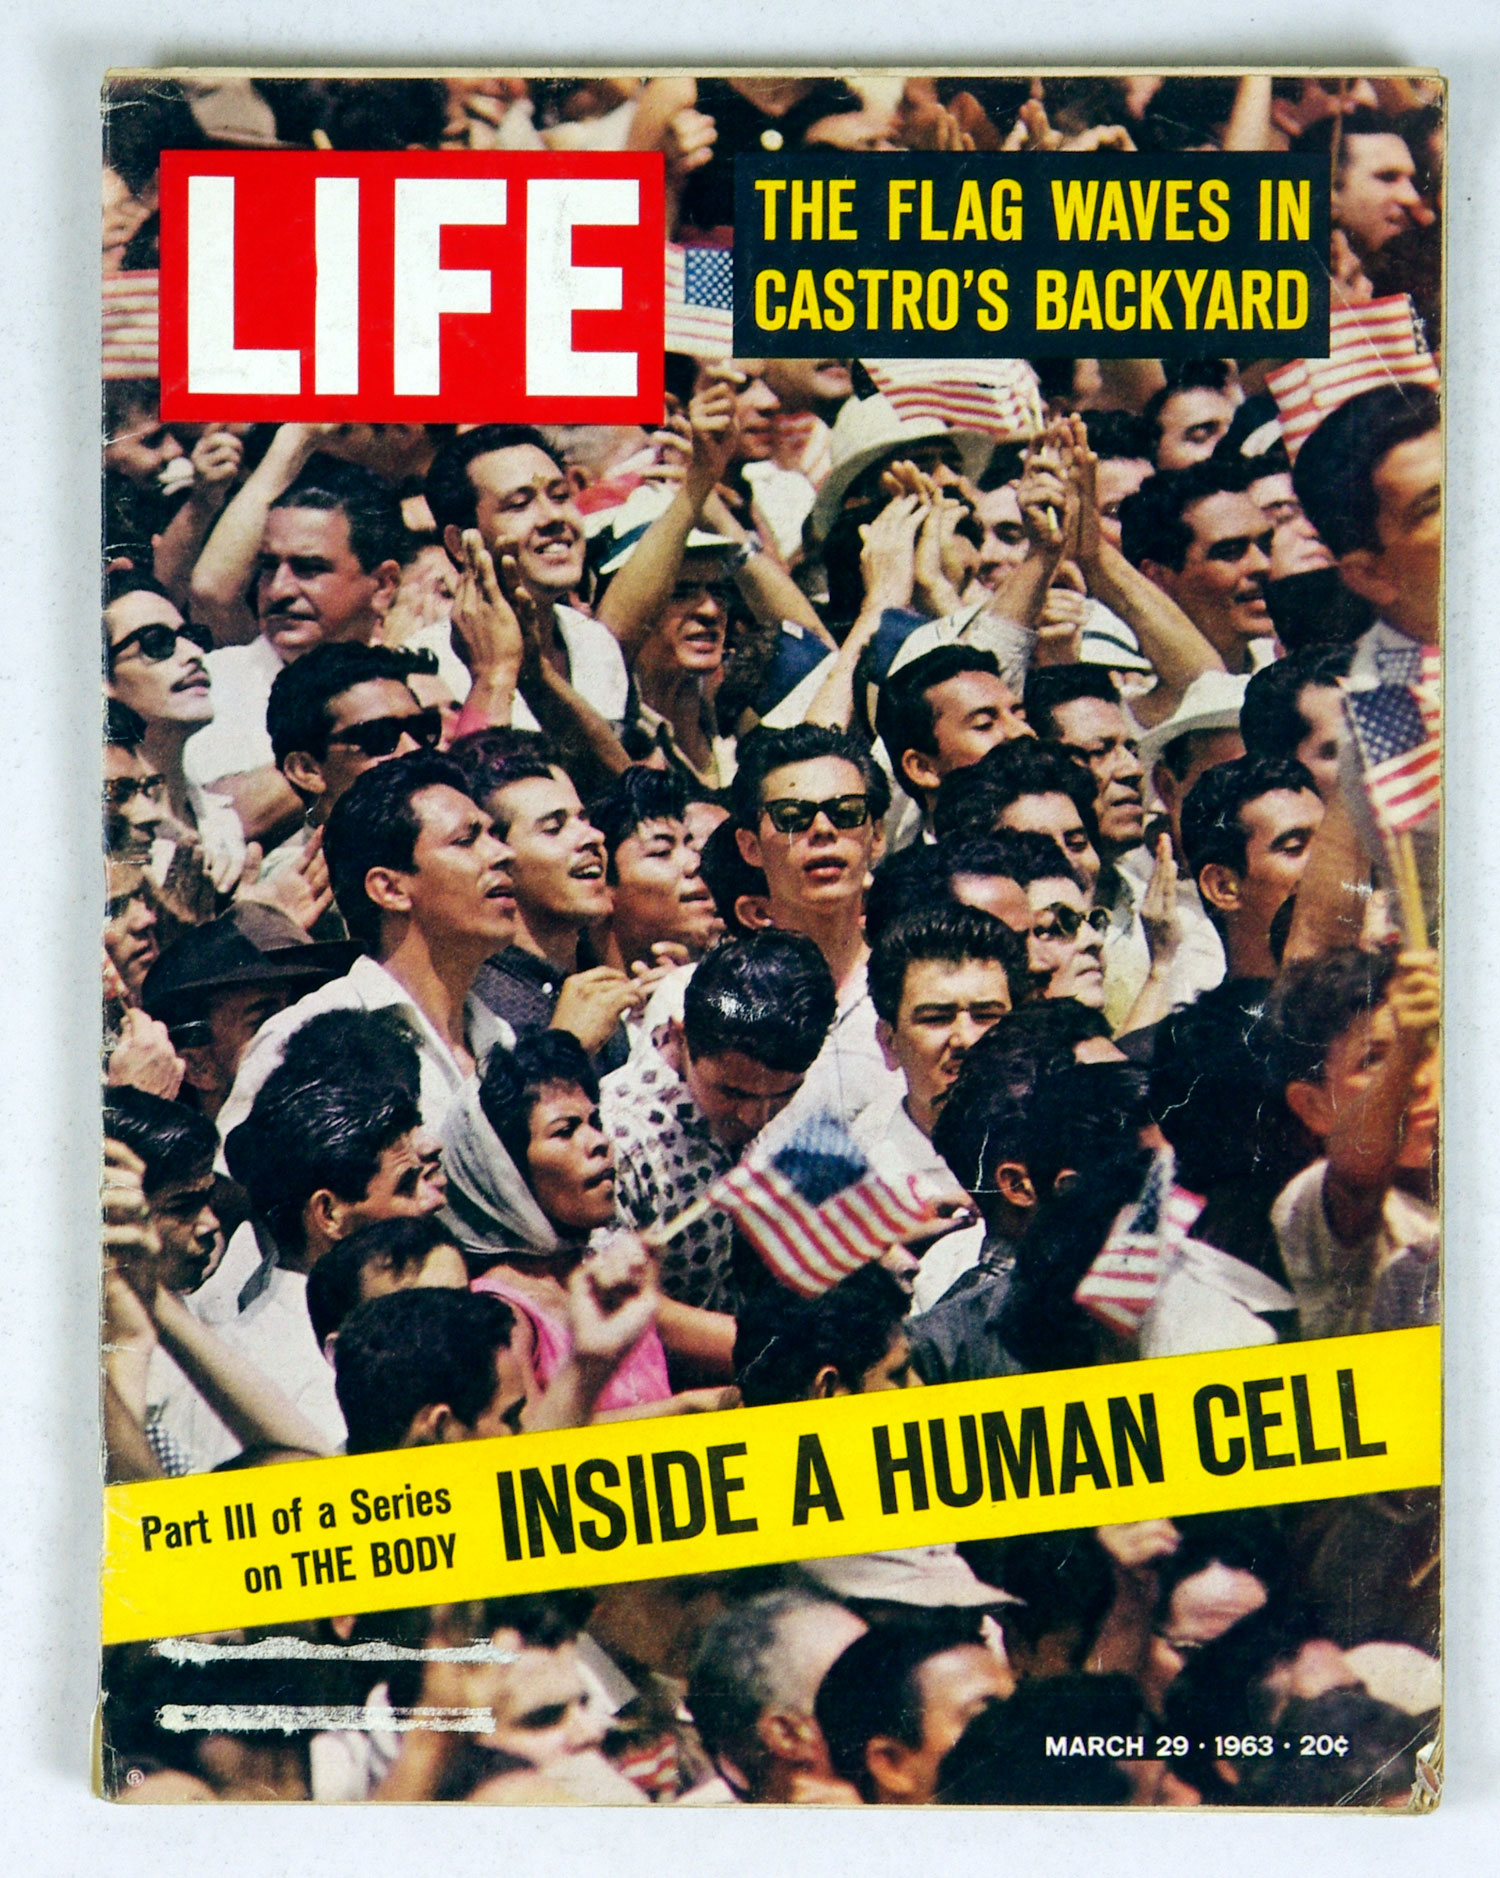 LIFE Magazine Back Issue 1963 March 29 The Flag Waves In Castro's Backyard